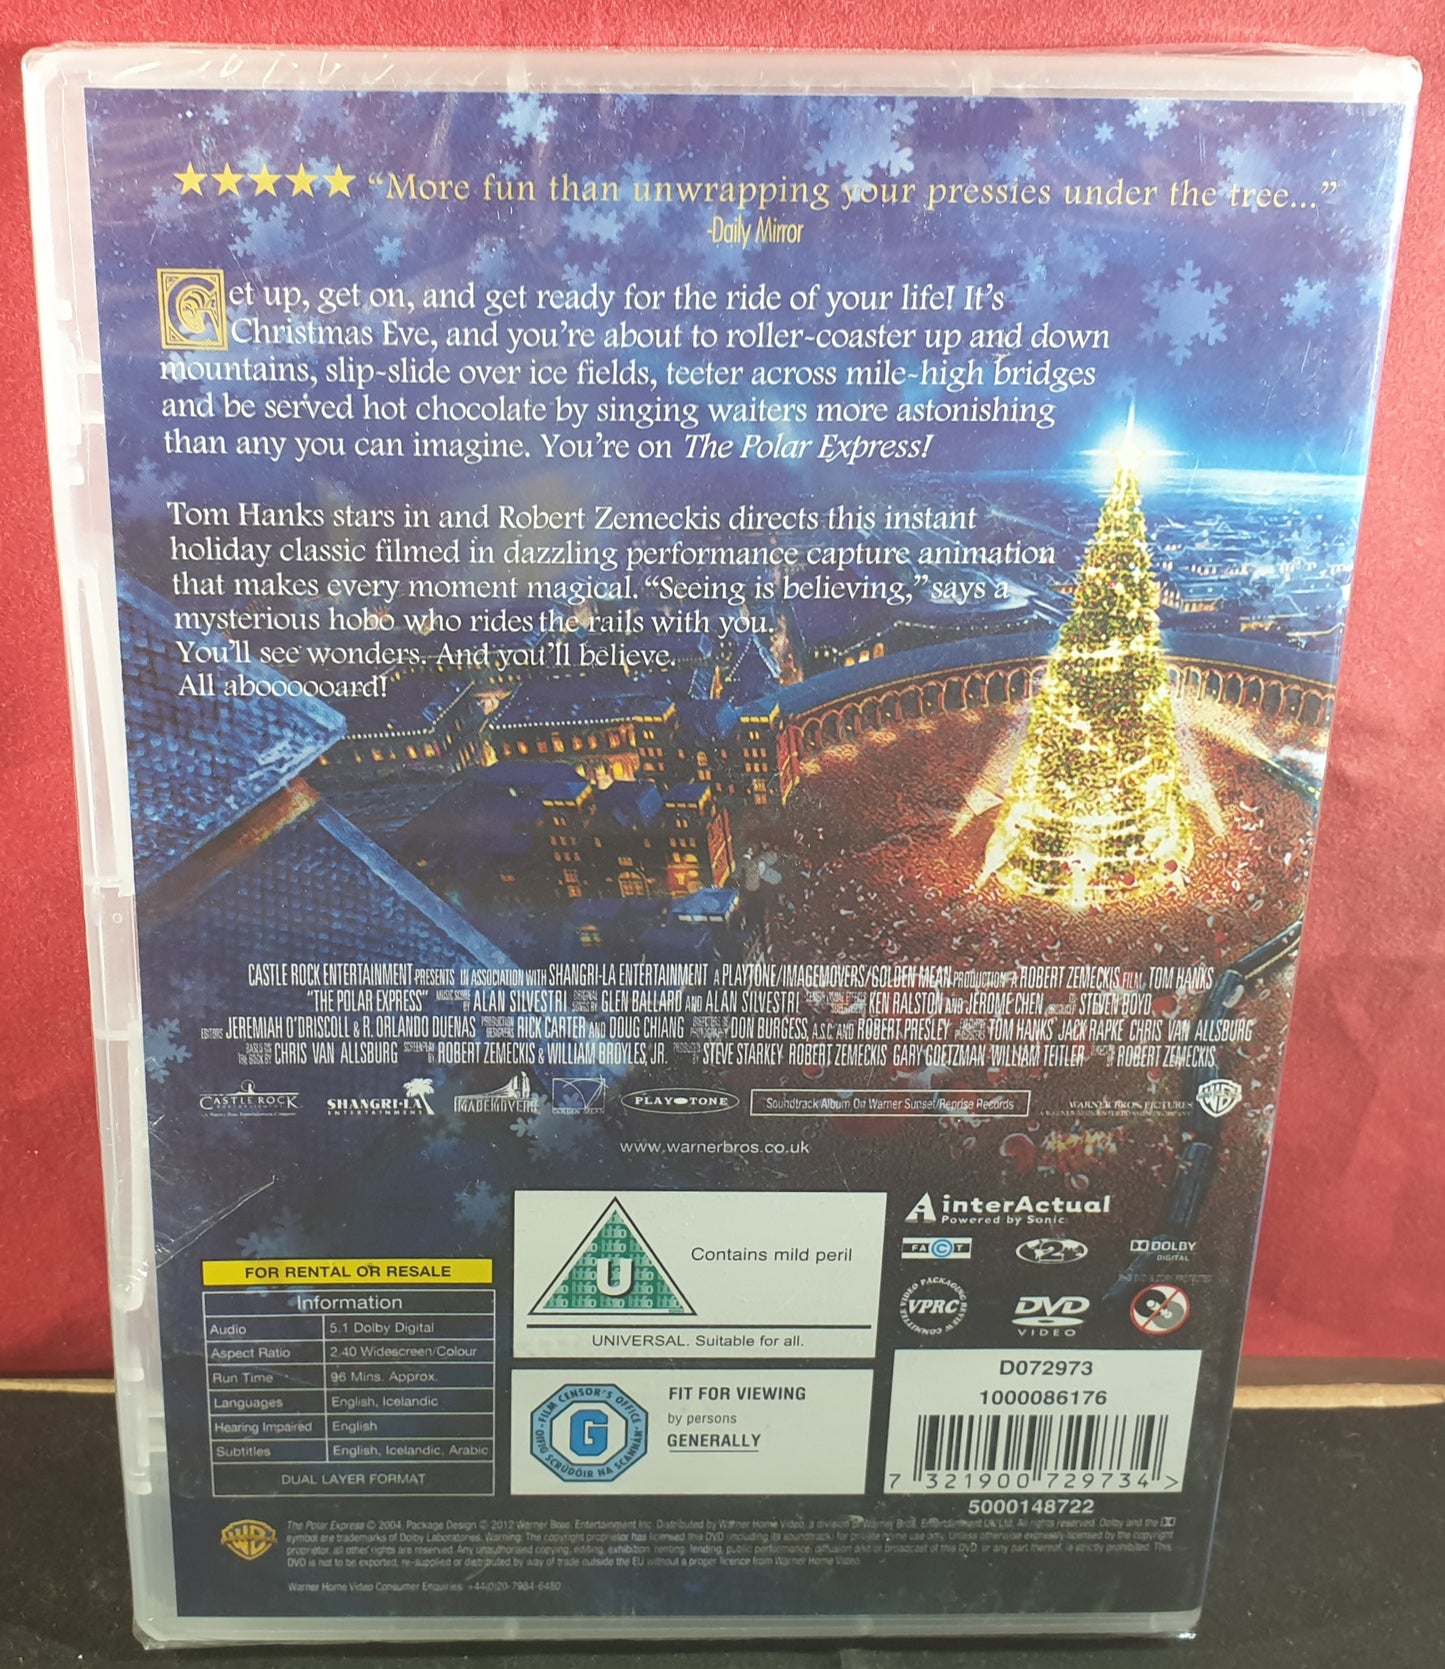 Brand New and Sealed Polar Express DVD